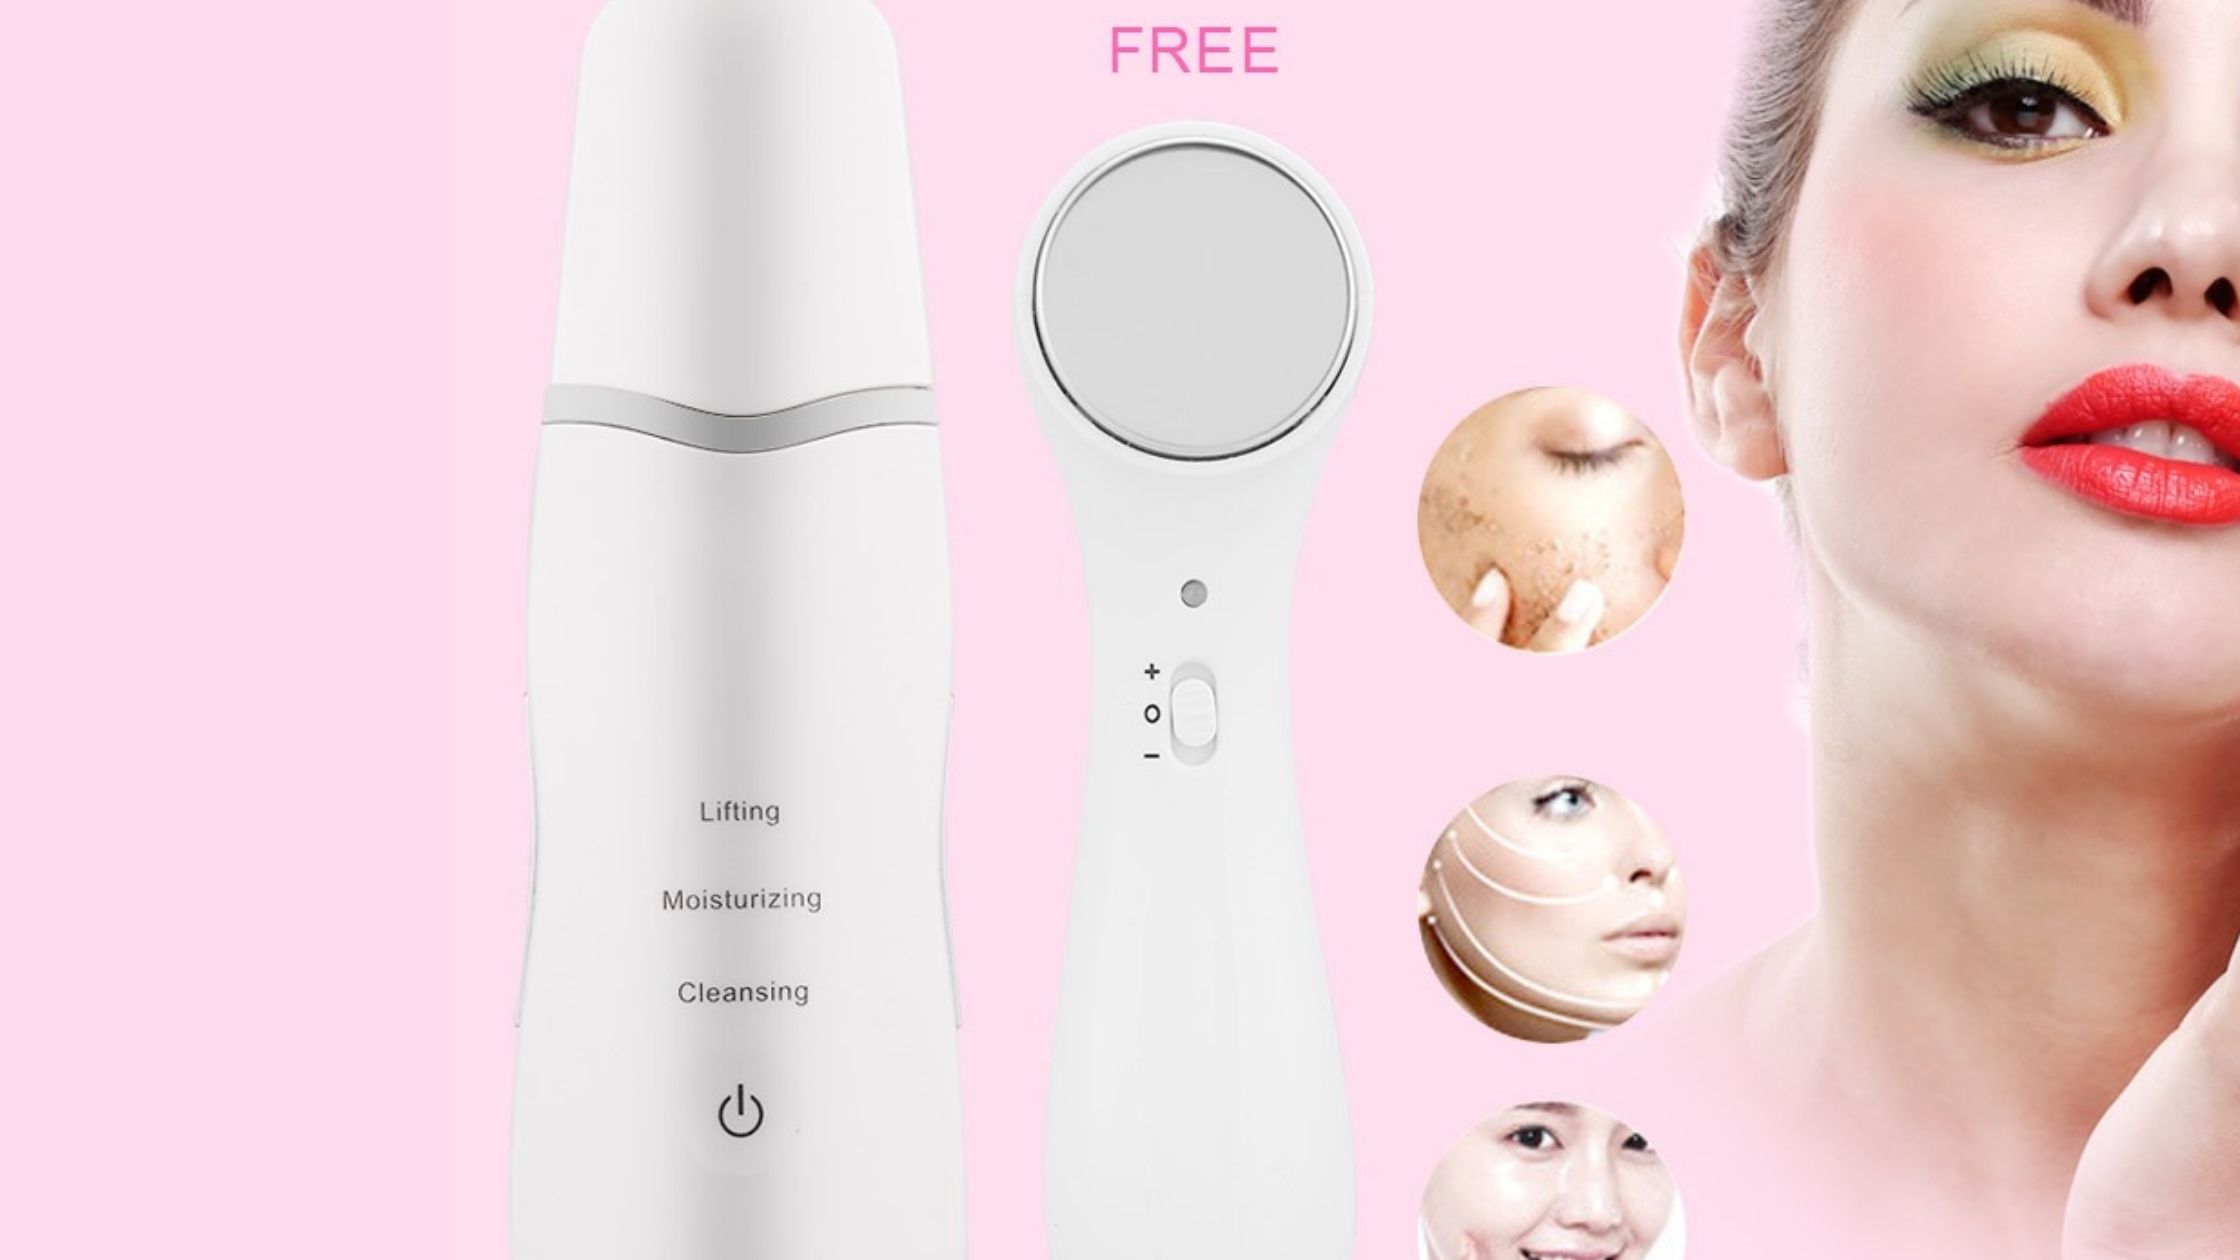 How does the Electric Dermapen device work?